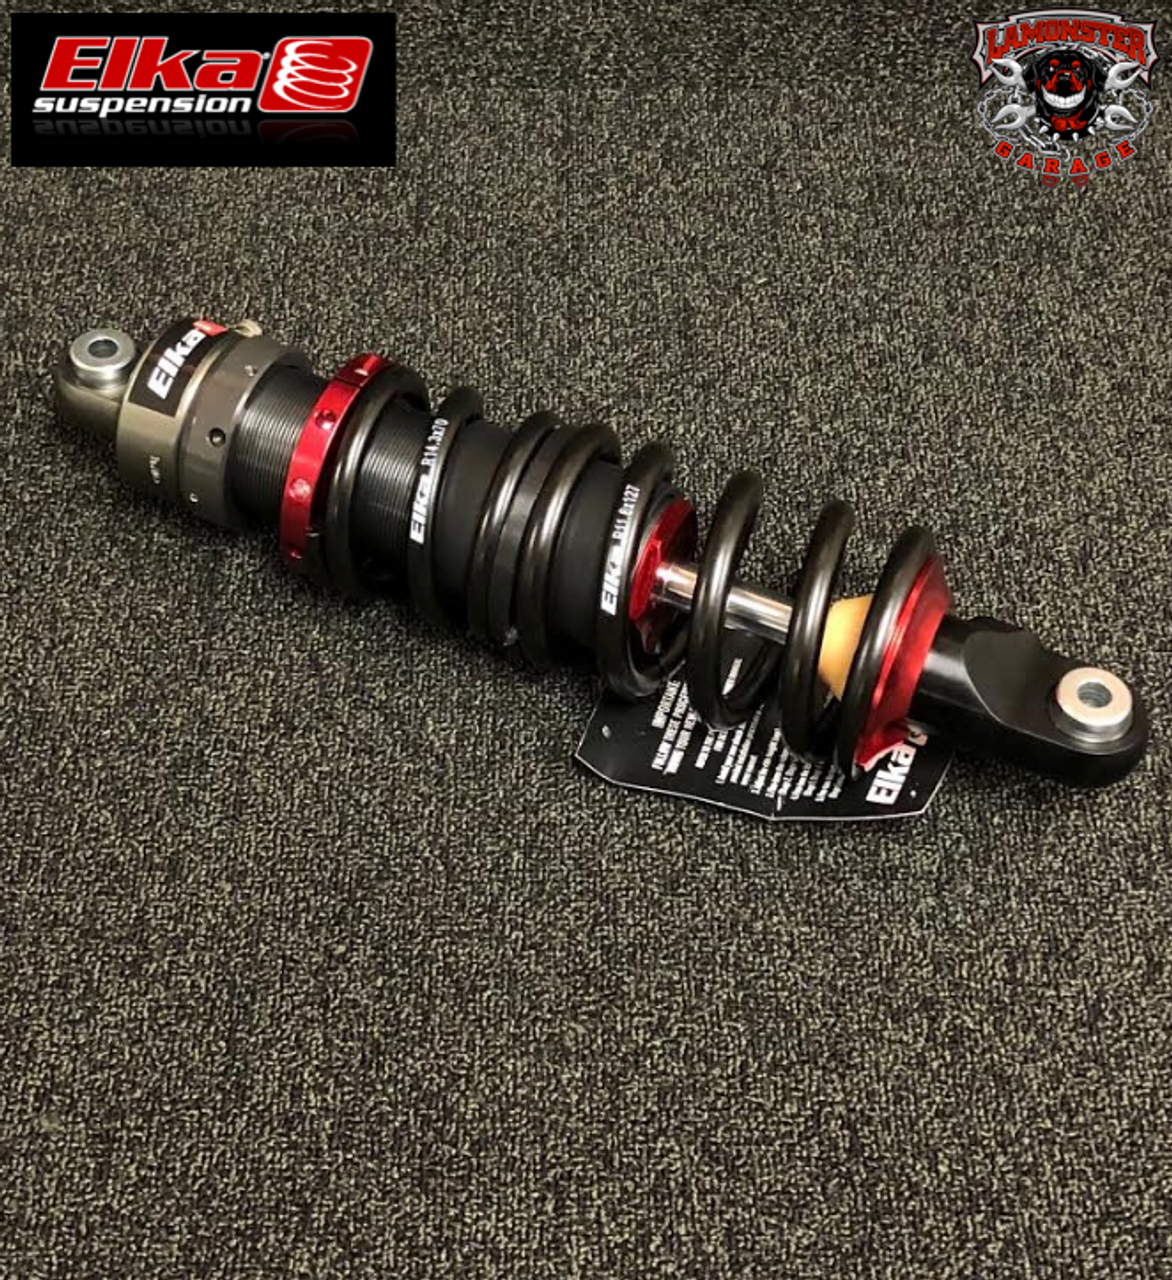 Stage 2 Elka® Shock (Rear) Can Am® Spyder F3 / F3-S (ELKA-70005) - Lamonster Garage®
THREADED MANUAL OR REMOTE HYDRAULIC SPRING PRELOAD
Available as a manual threaded adjuster or convenient remote hydraulic preload adjuster. Lets the rider fine-tune the initial force applied on the springs and precisely balance the weight distribution across the front and rear of the vehicle while setting up the ride height (sag) and to lower or raise the vehicle to adapt to various situations or to suit your personal preference.

To use, turn the preload adjustment ring clockwise (from top of the shock) to increase preload and raise the vehicle or turn counter-clockwise to reduce preload and lower the vehicle.

